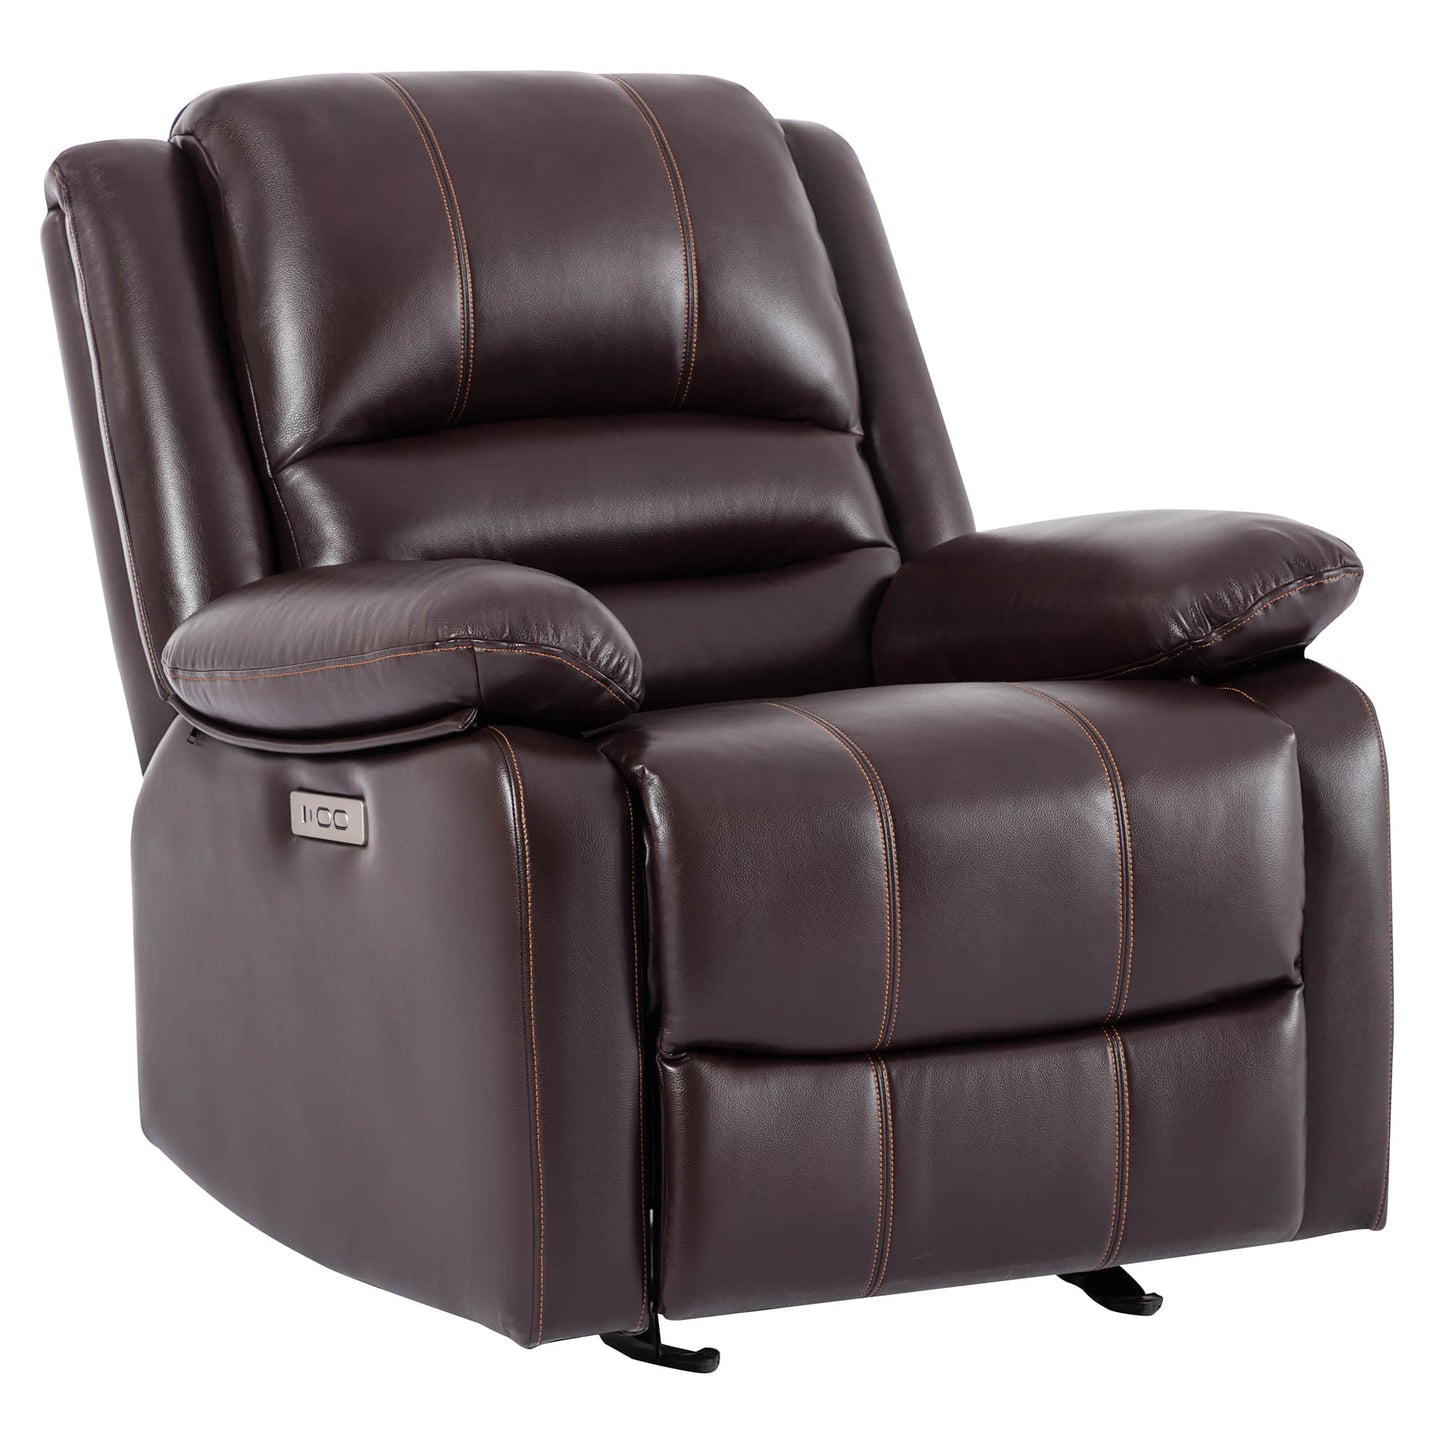 CHITA LIVING-Luckie Power Glider Recliner with Lumbar Support-Recliners-Faux Leather-Brown-